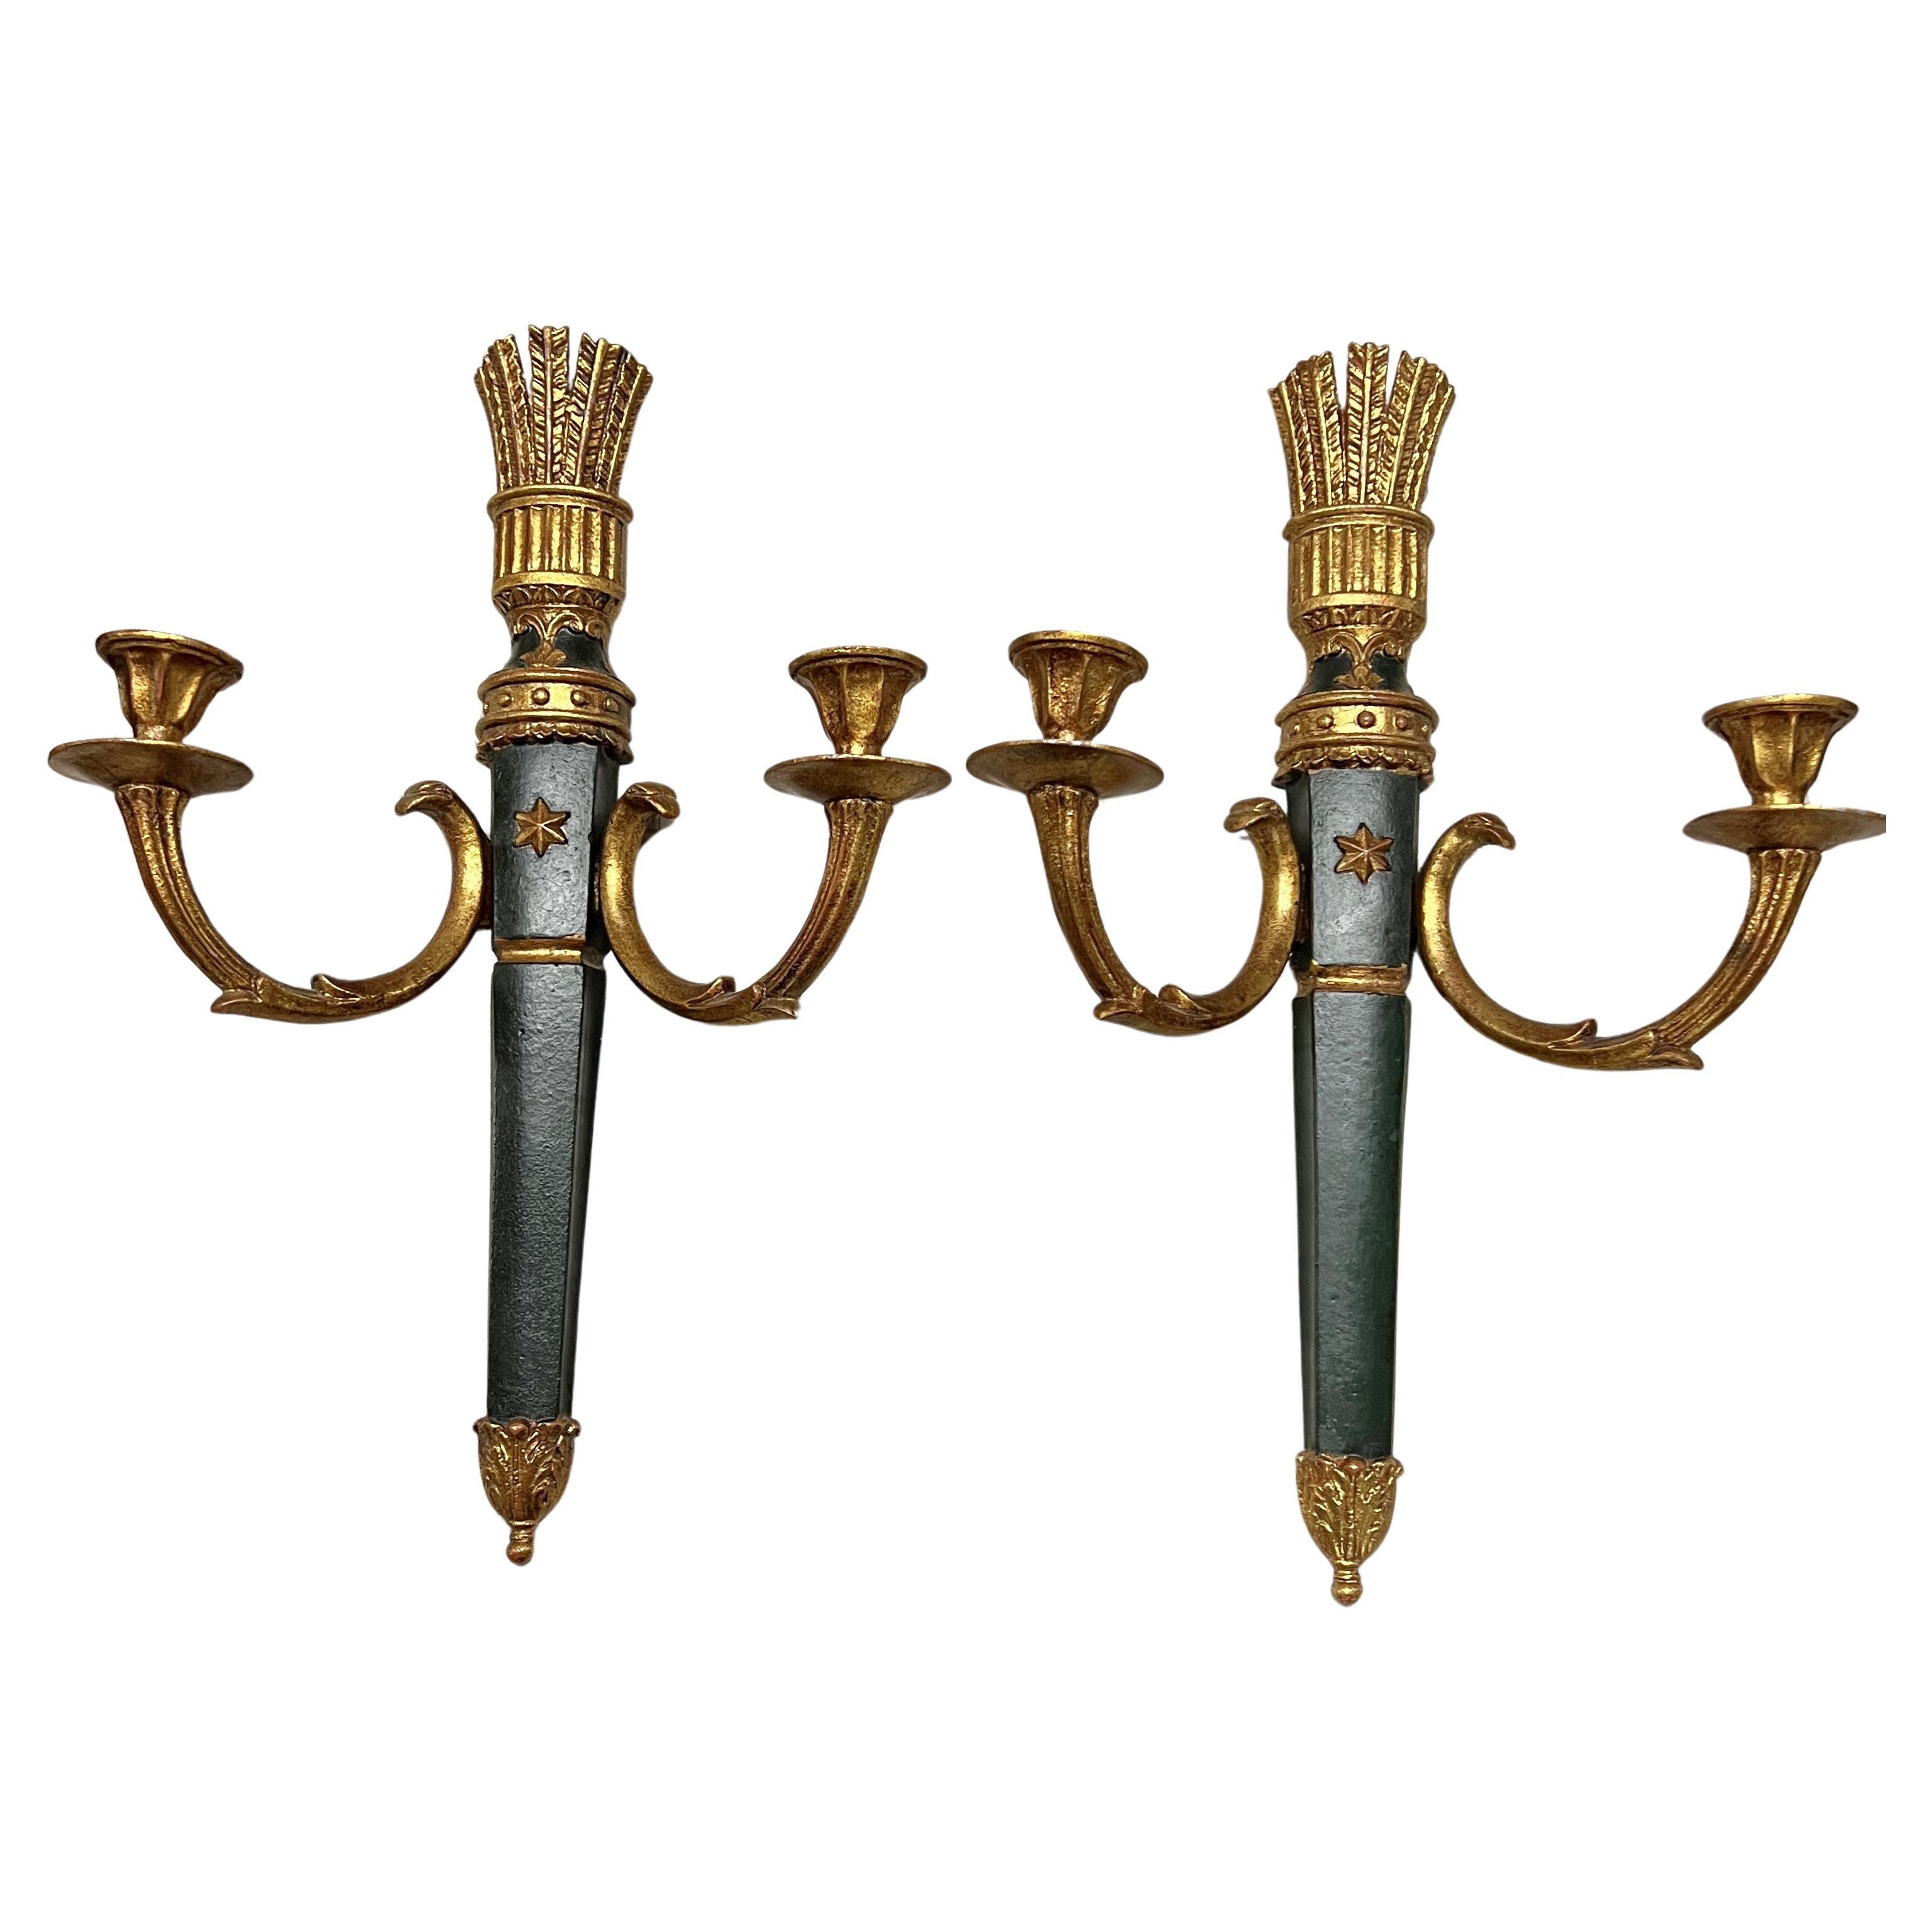 Pair of Neoclassical Quiver Themed Gilt Wall Sconces by Palladio For Sale